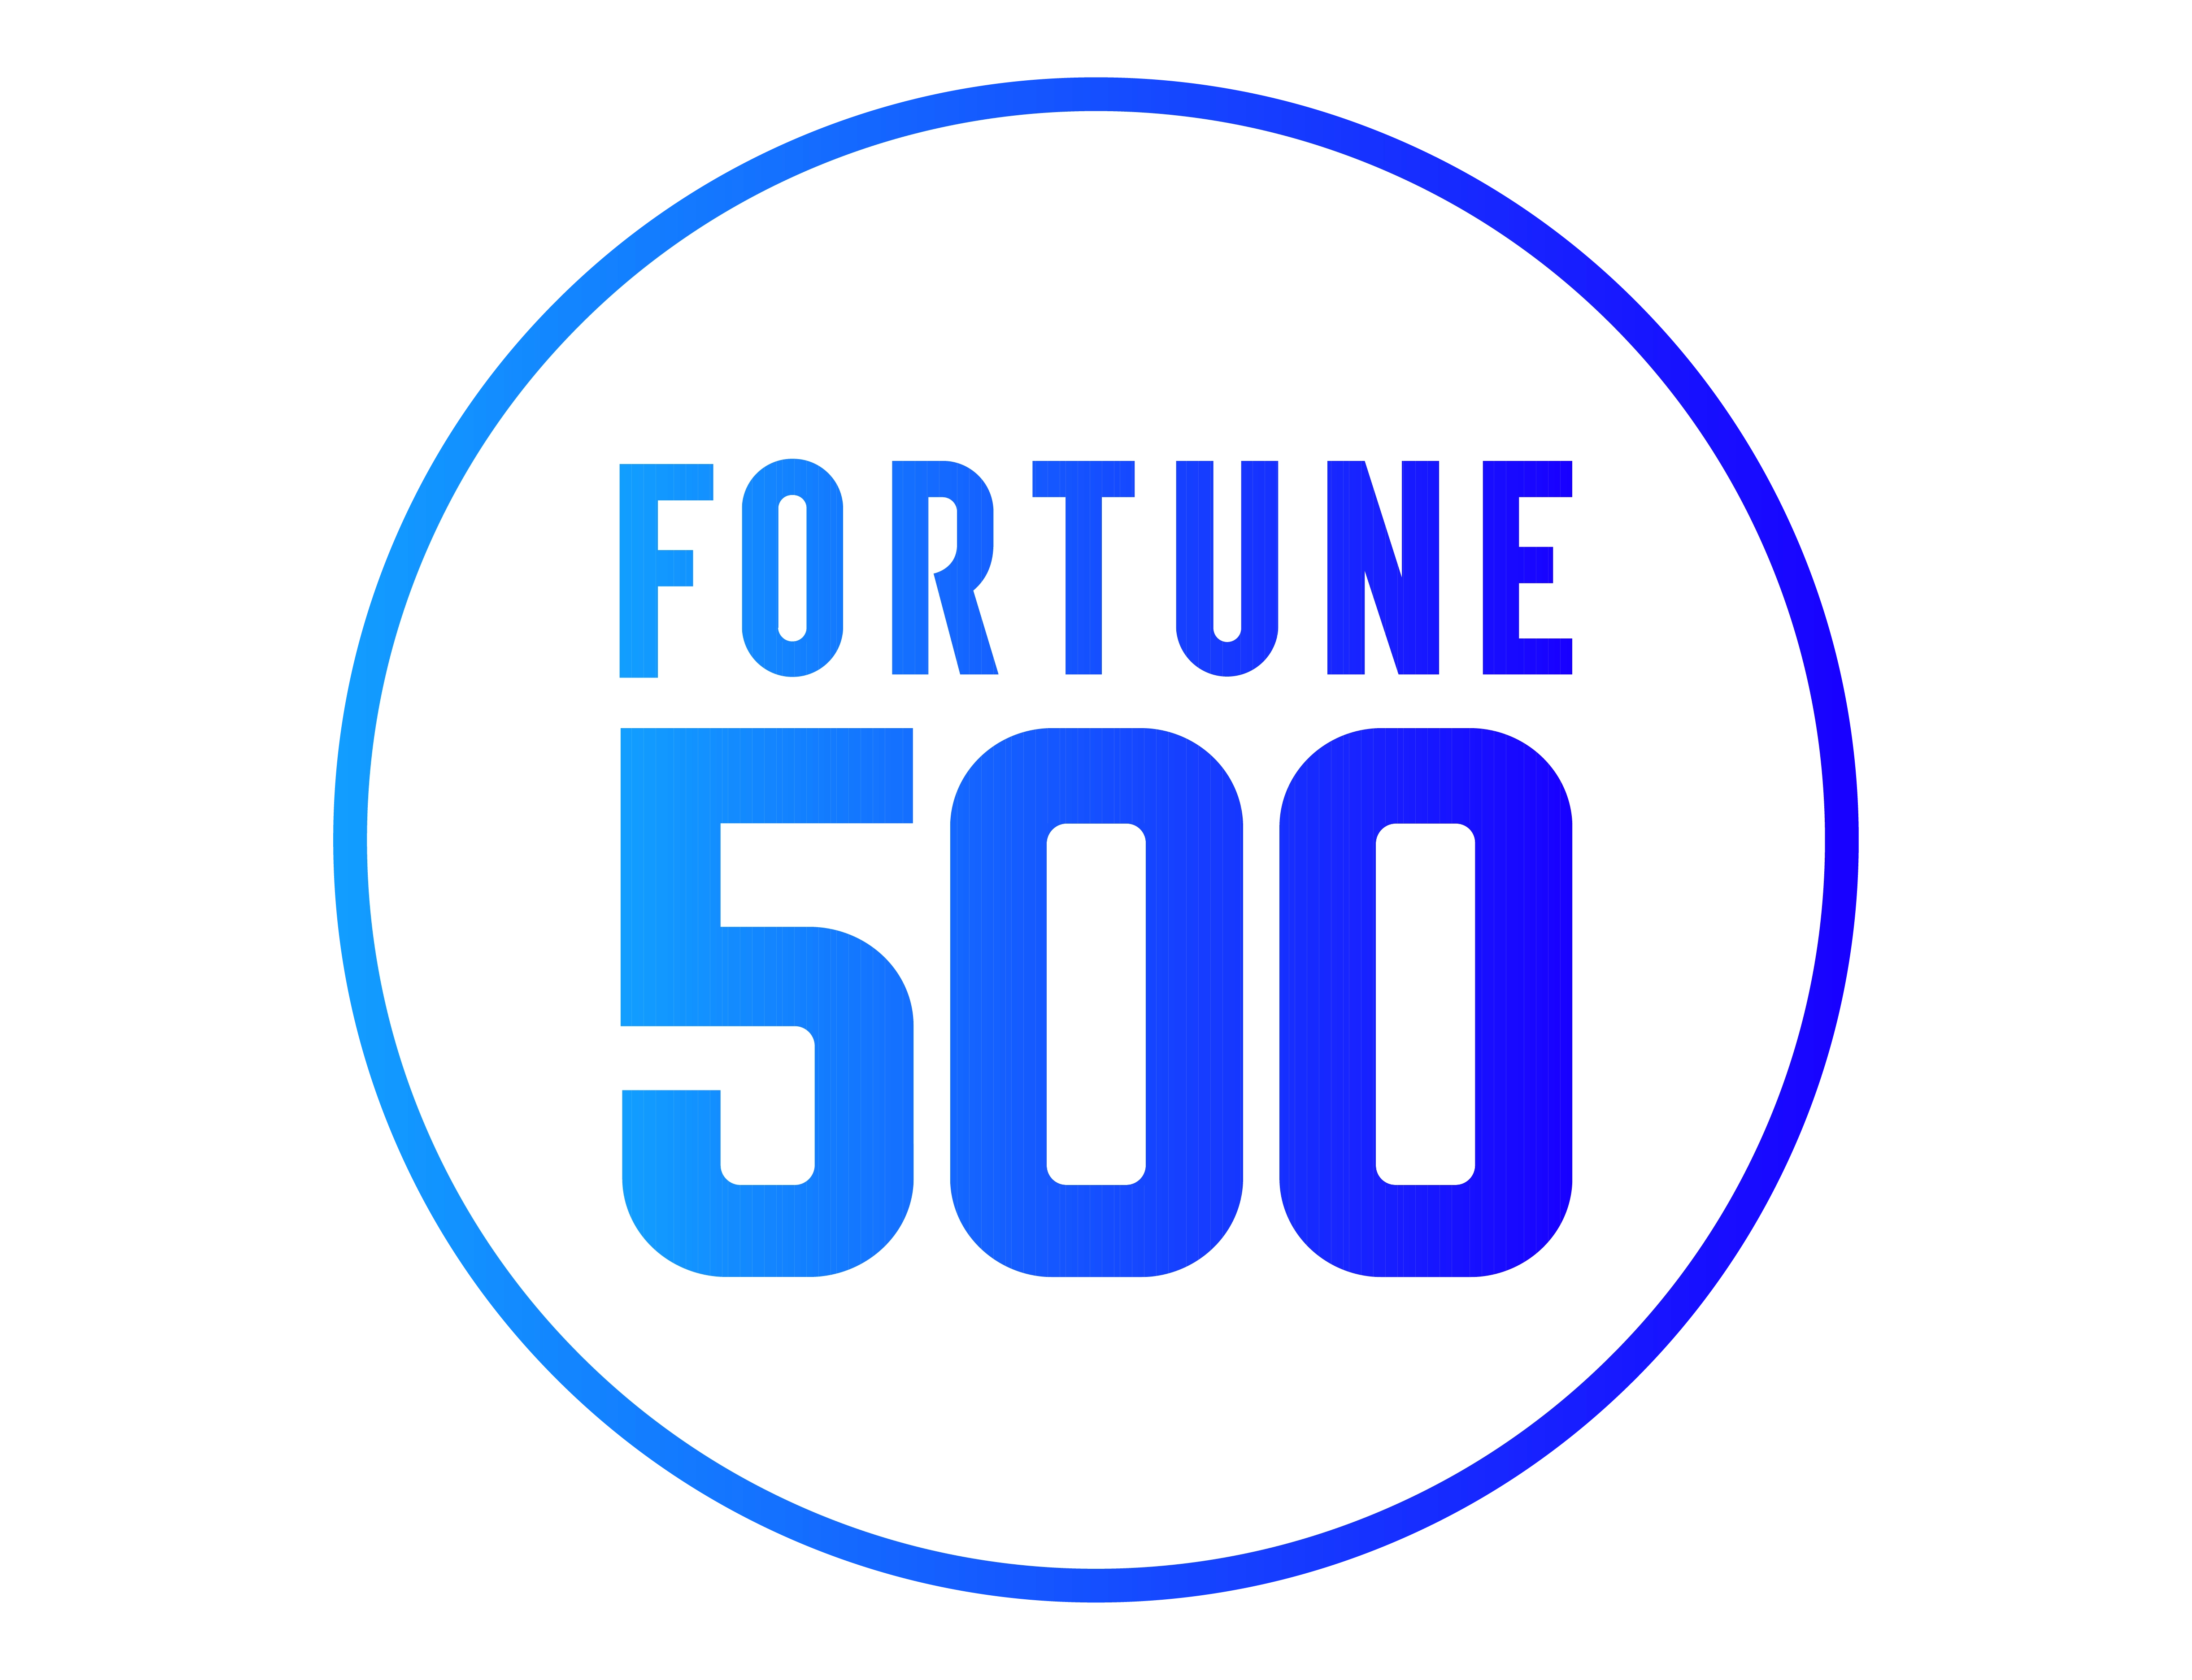 Fortune 500 - Taylor